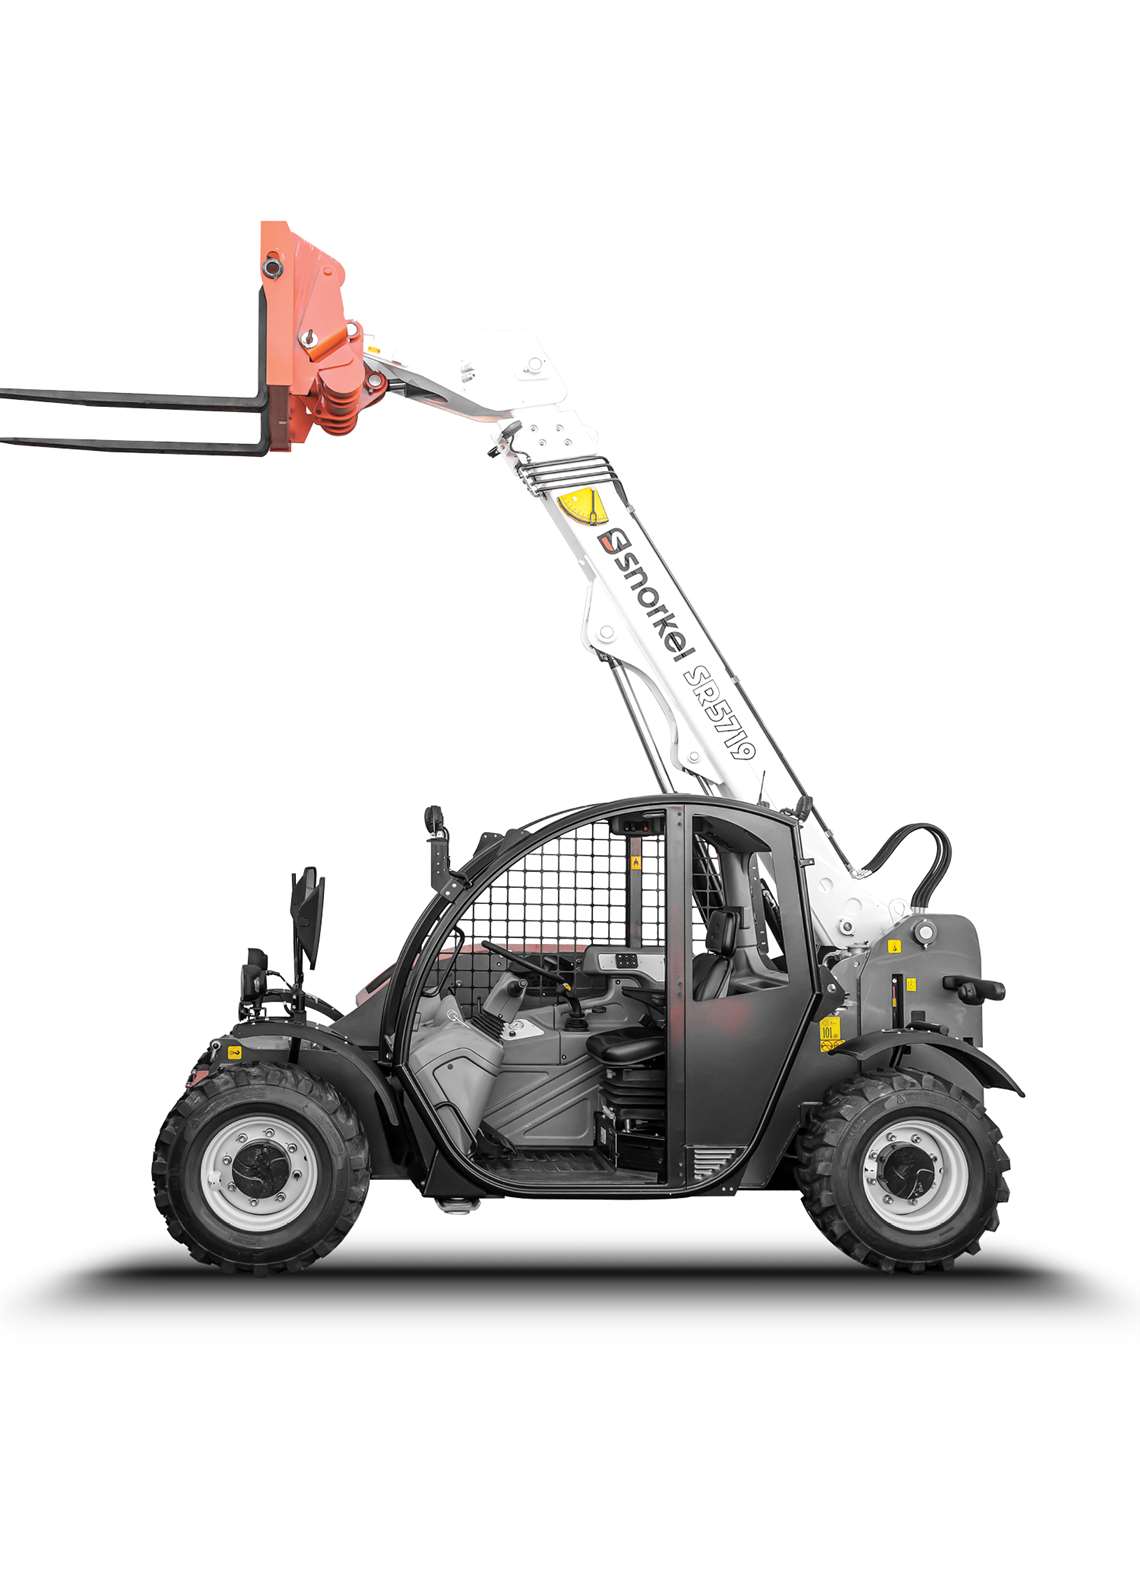 Snorkel's SR5719 telehandler equipped with an open cab 